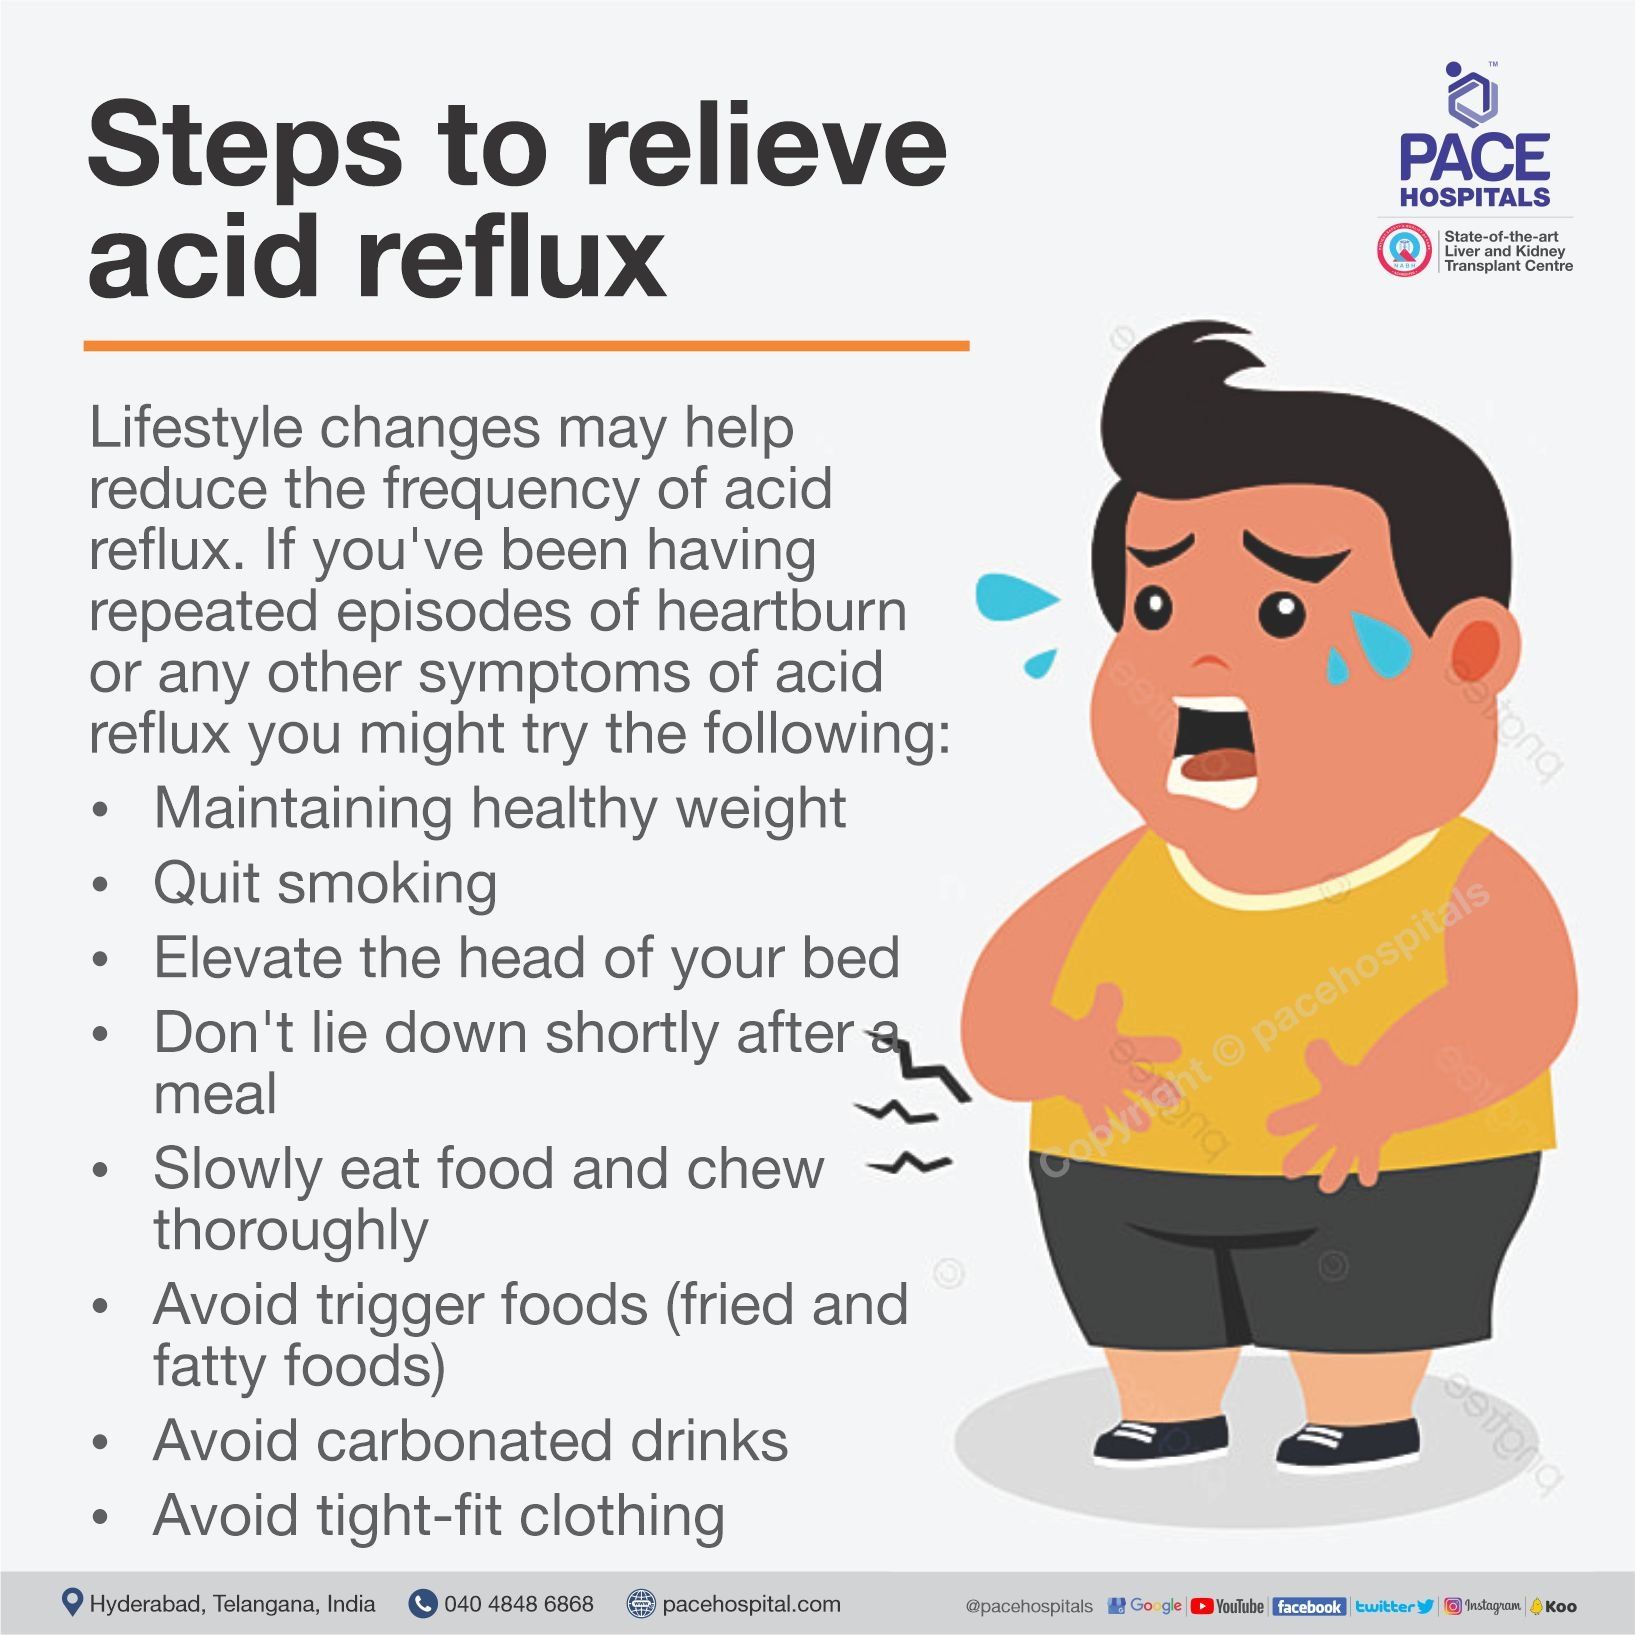 8 Ways to relieve acid reflux without medication | GERD (Gastroesophageal reflux disease) or chronic acid reflux